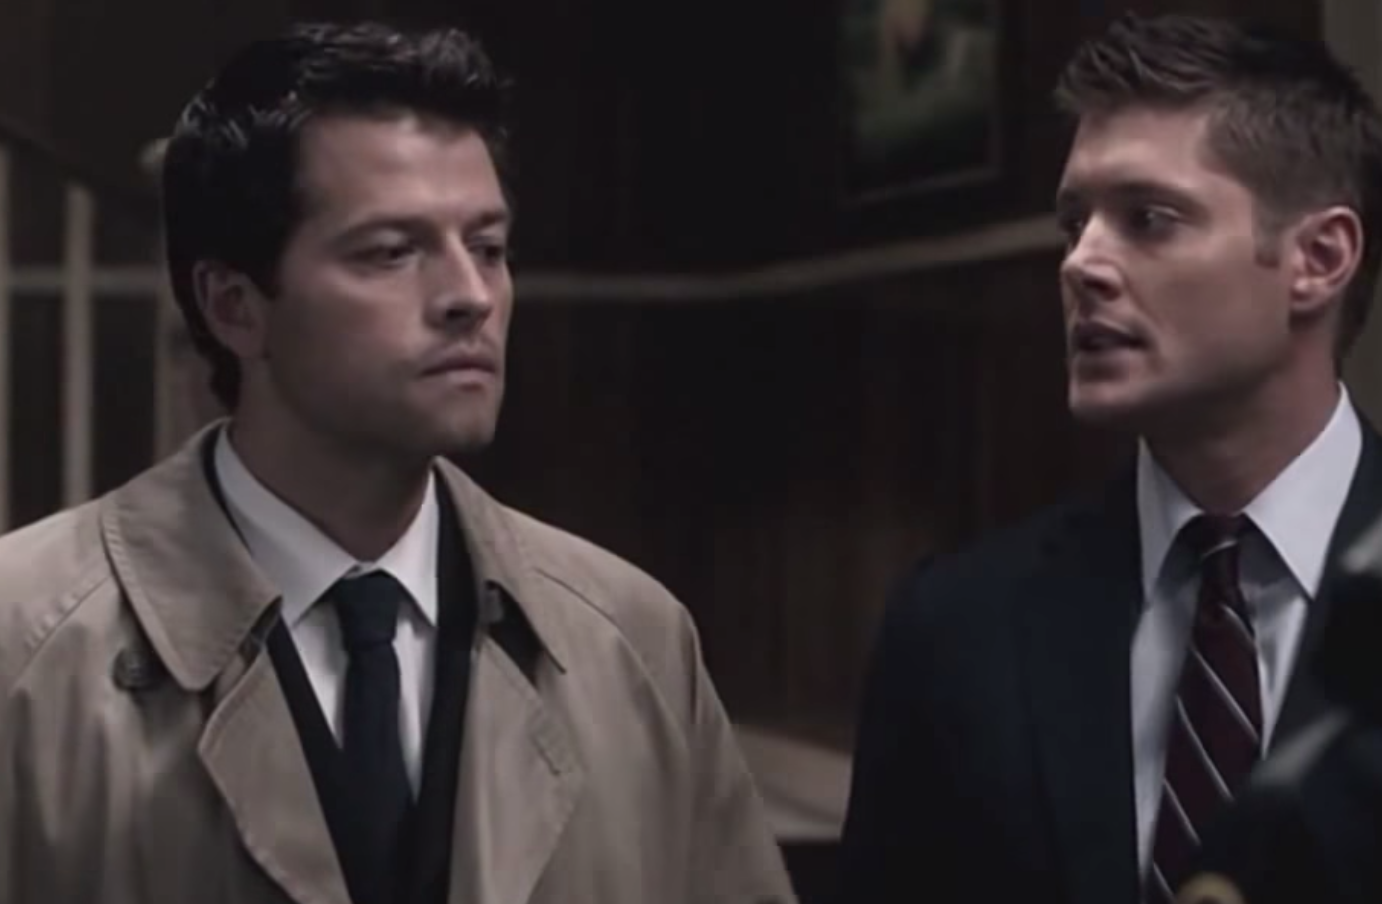 Dean Winchester looks exasperated at Castiel, who stands with a blank look on his face